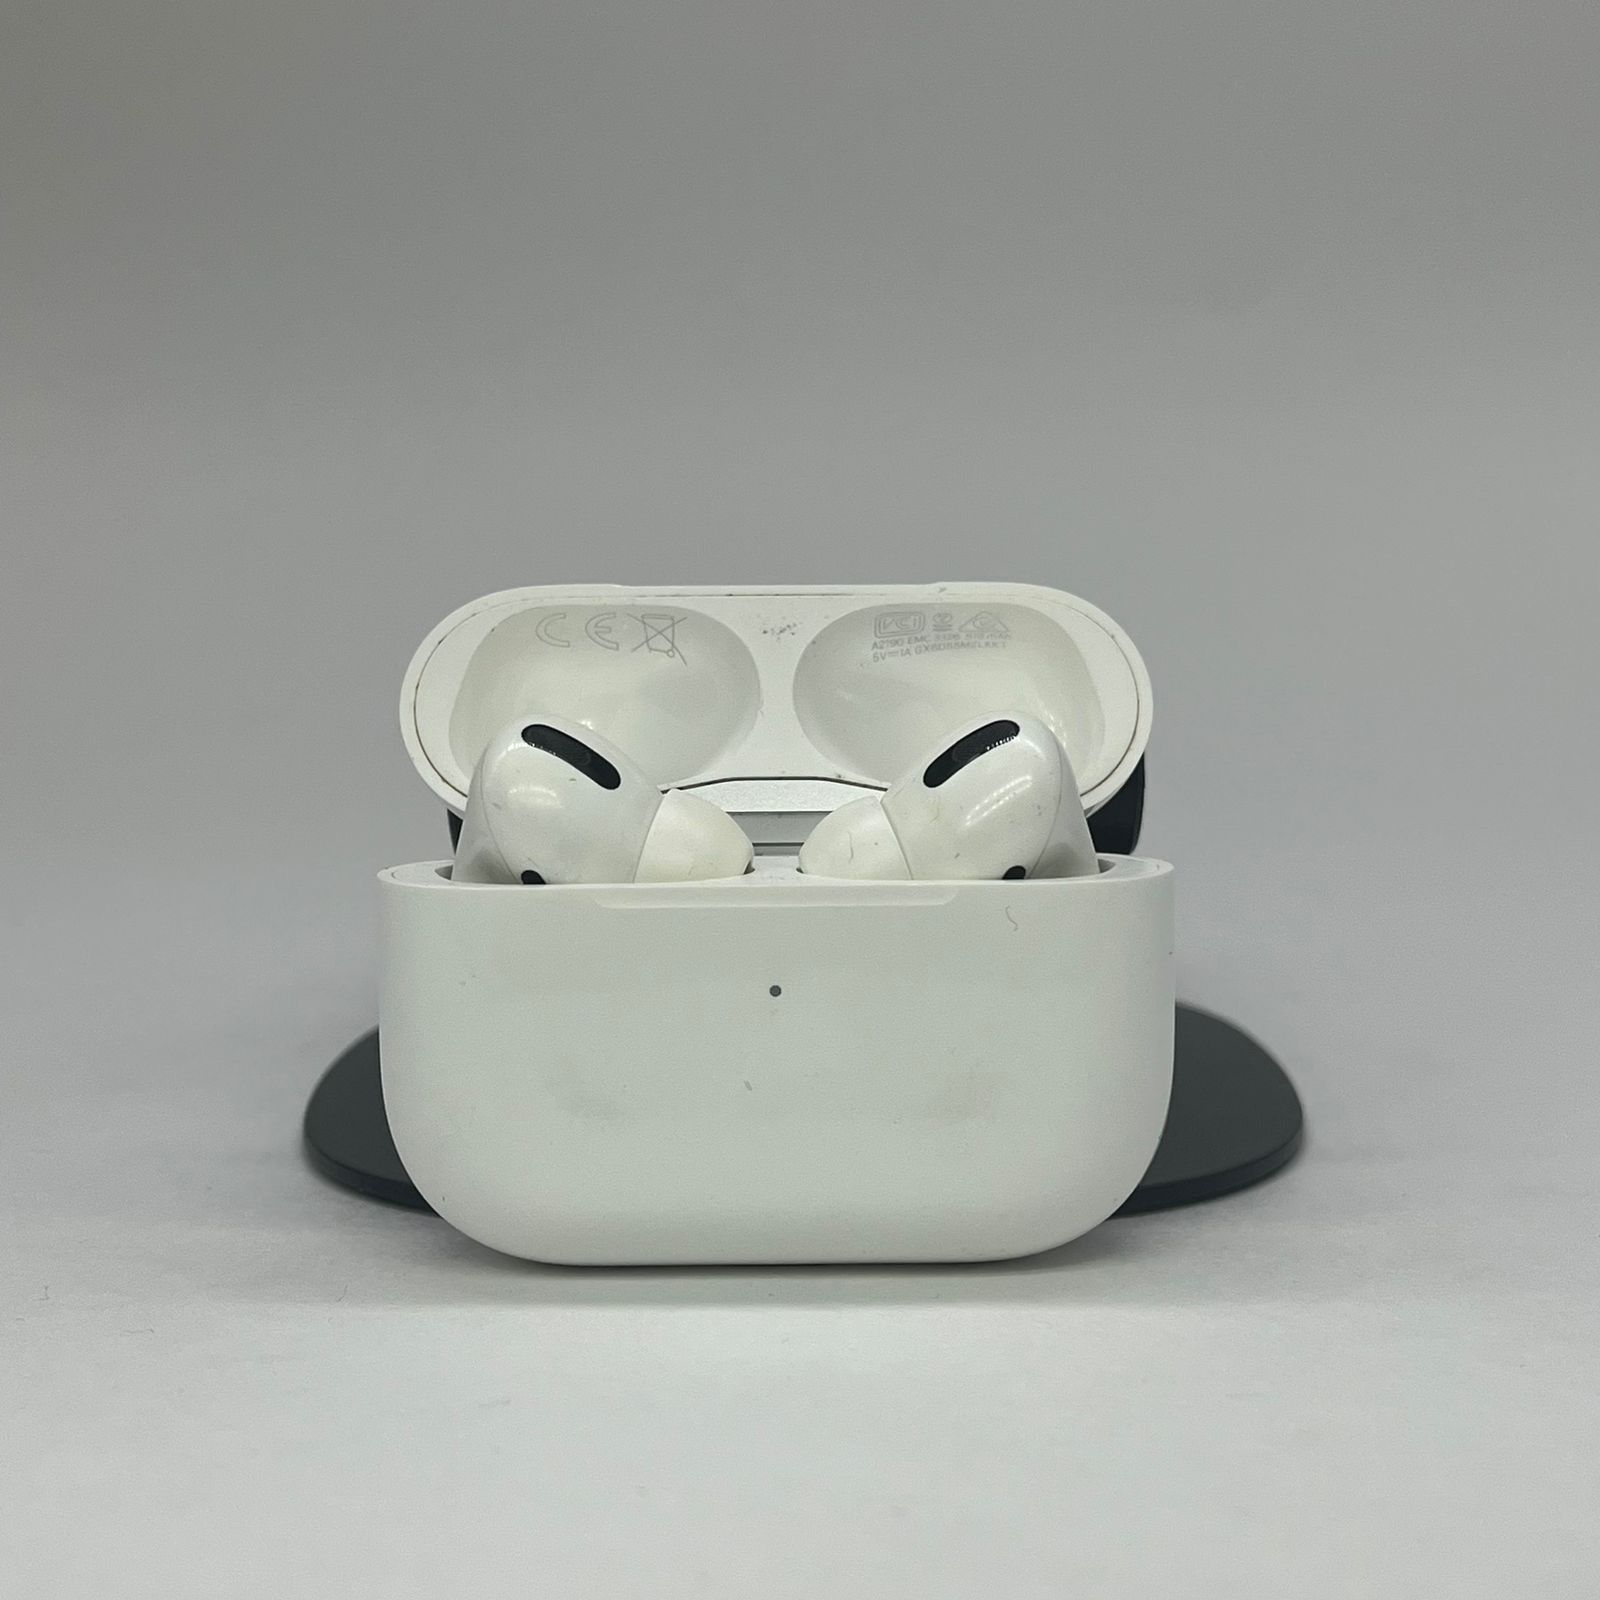 AirPods Pro - фото_1